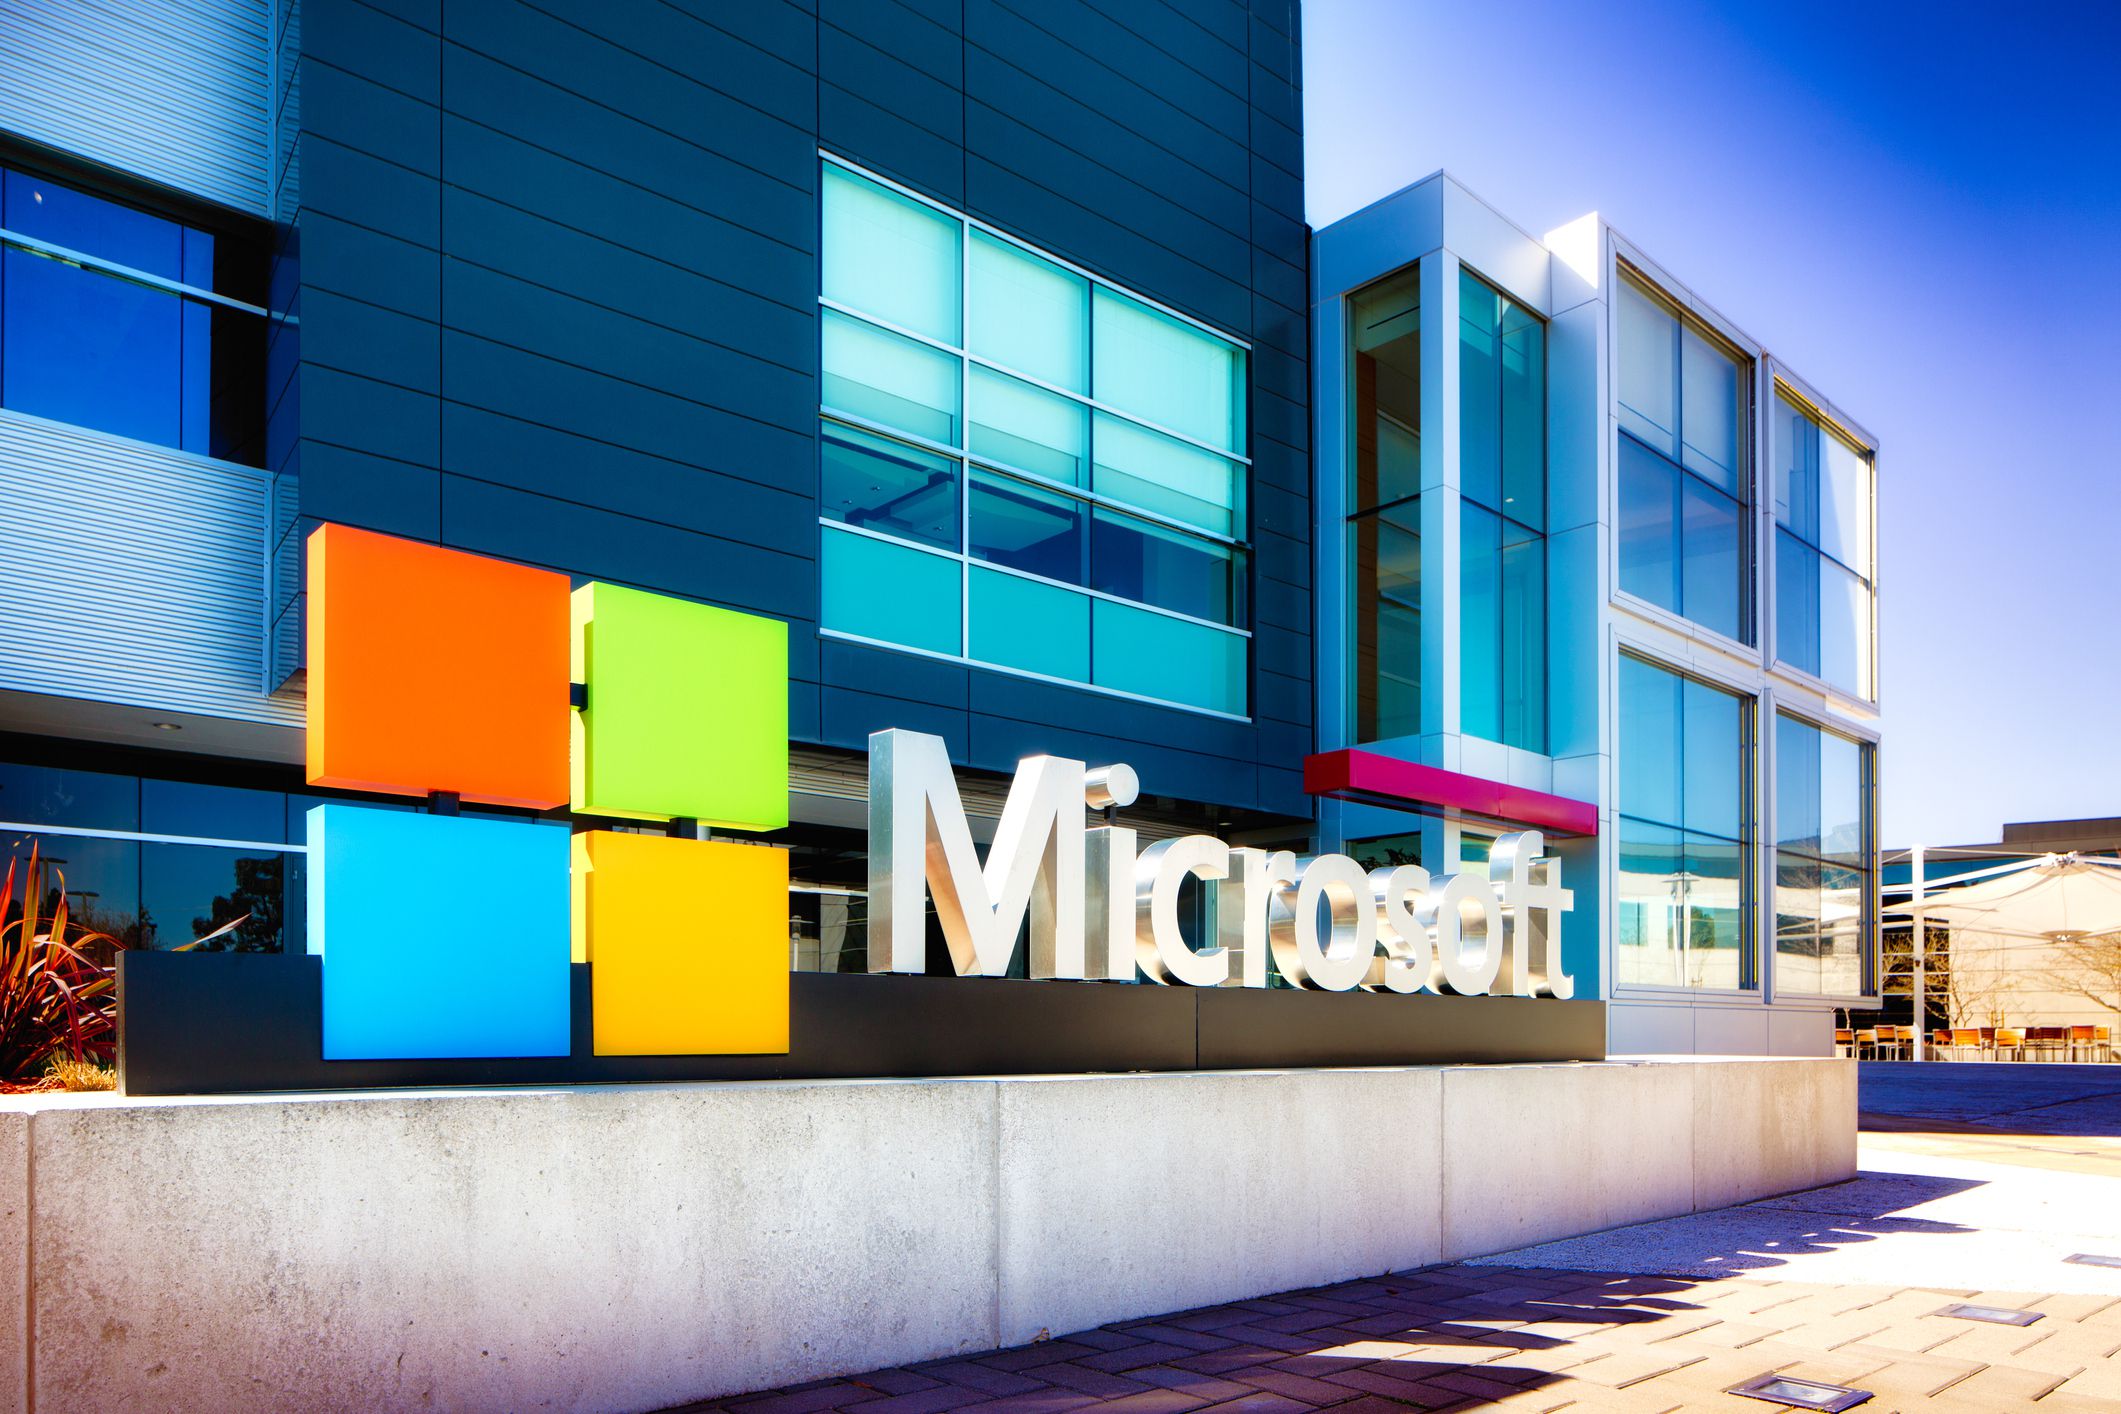 Microsoft have announced a new startup accelerator program designed to foster a culture of innovation among African startups